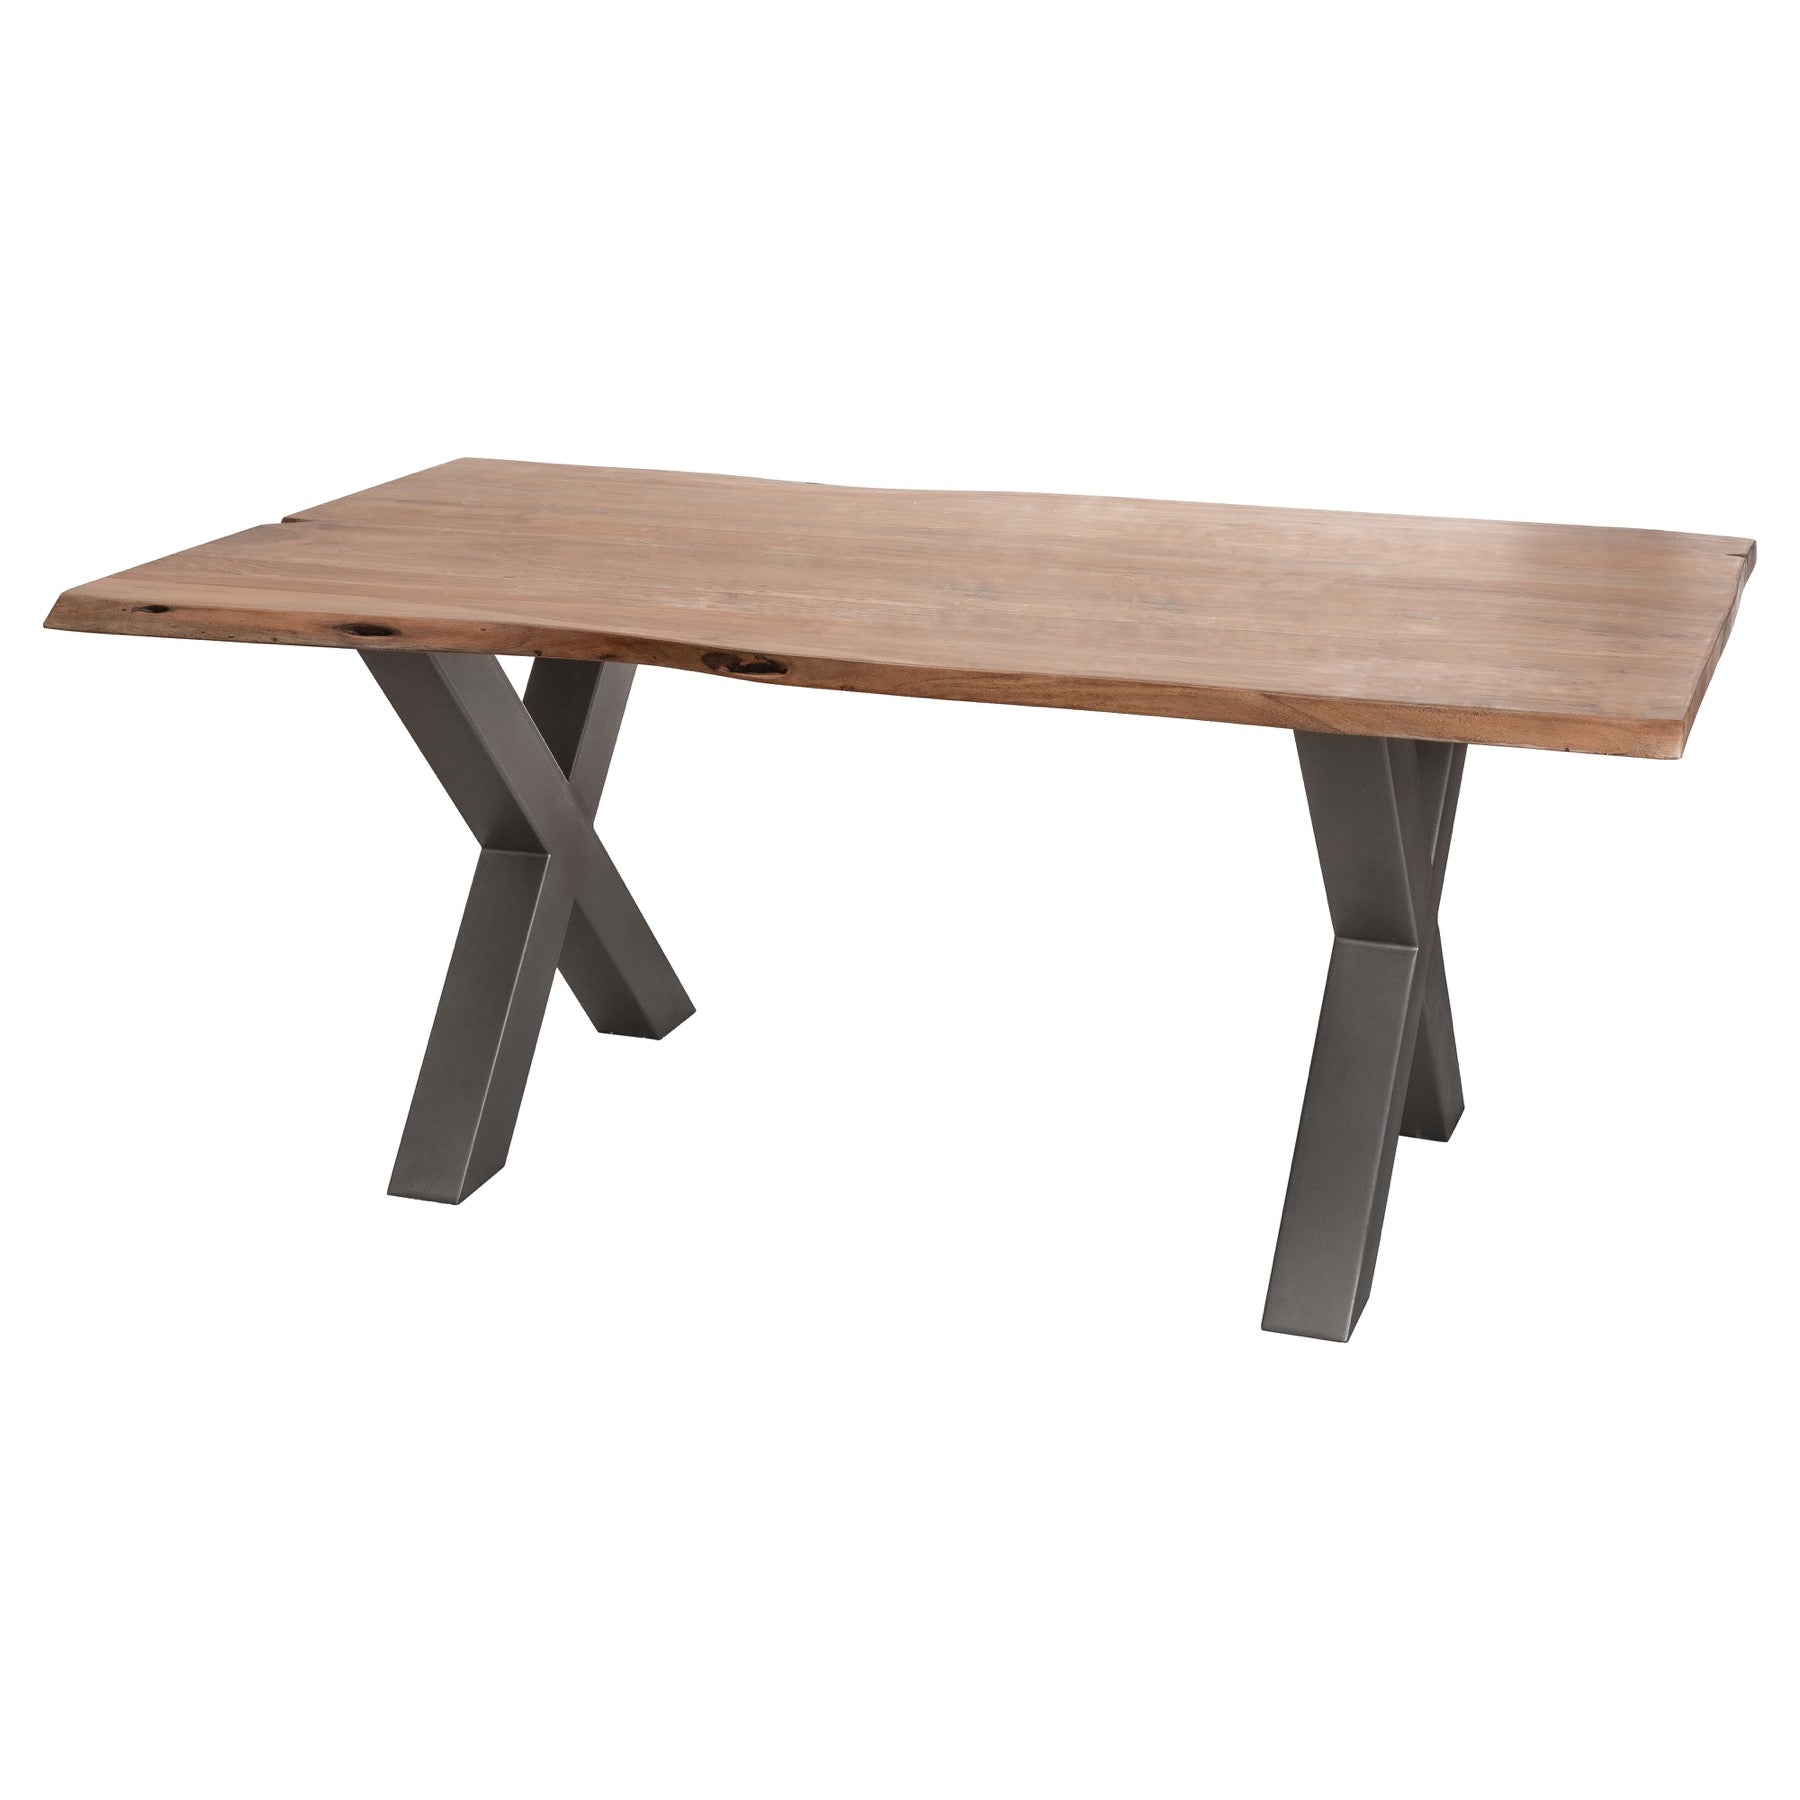 View Live Edge Collection Dining Table information